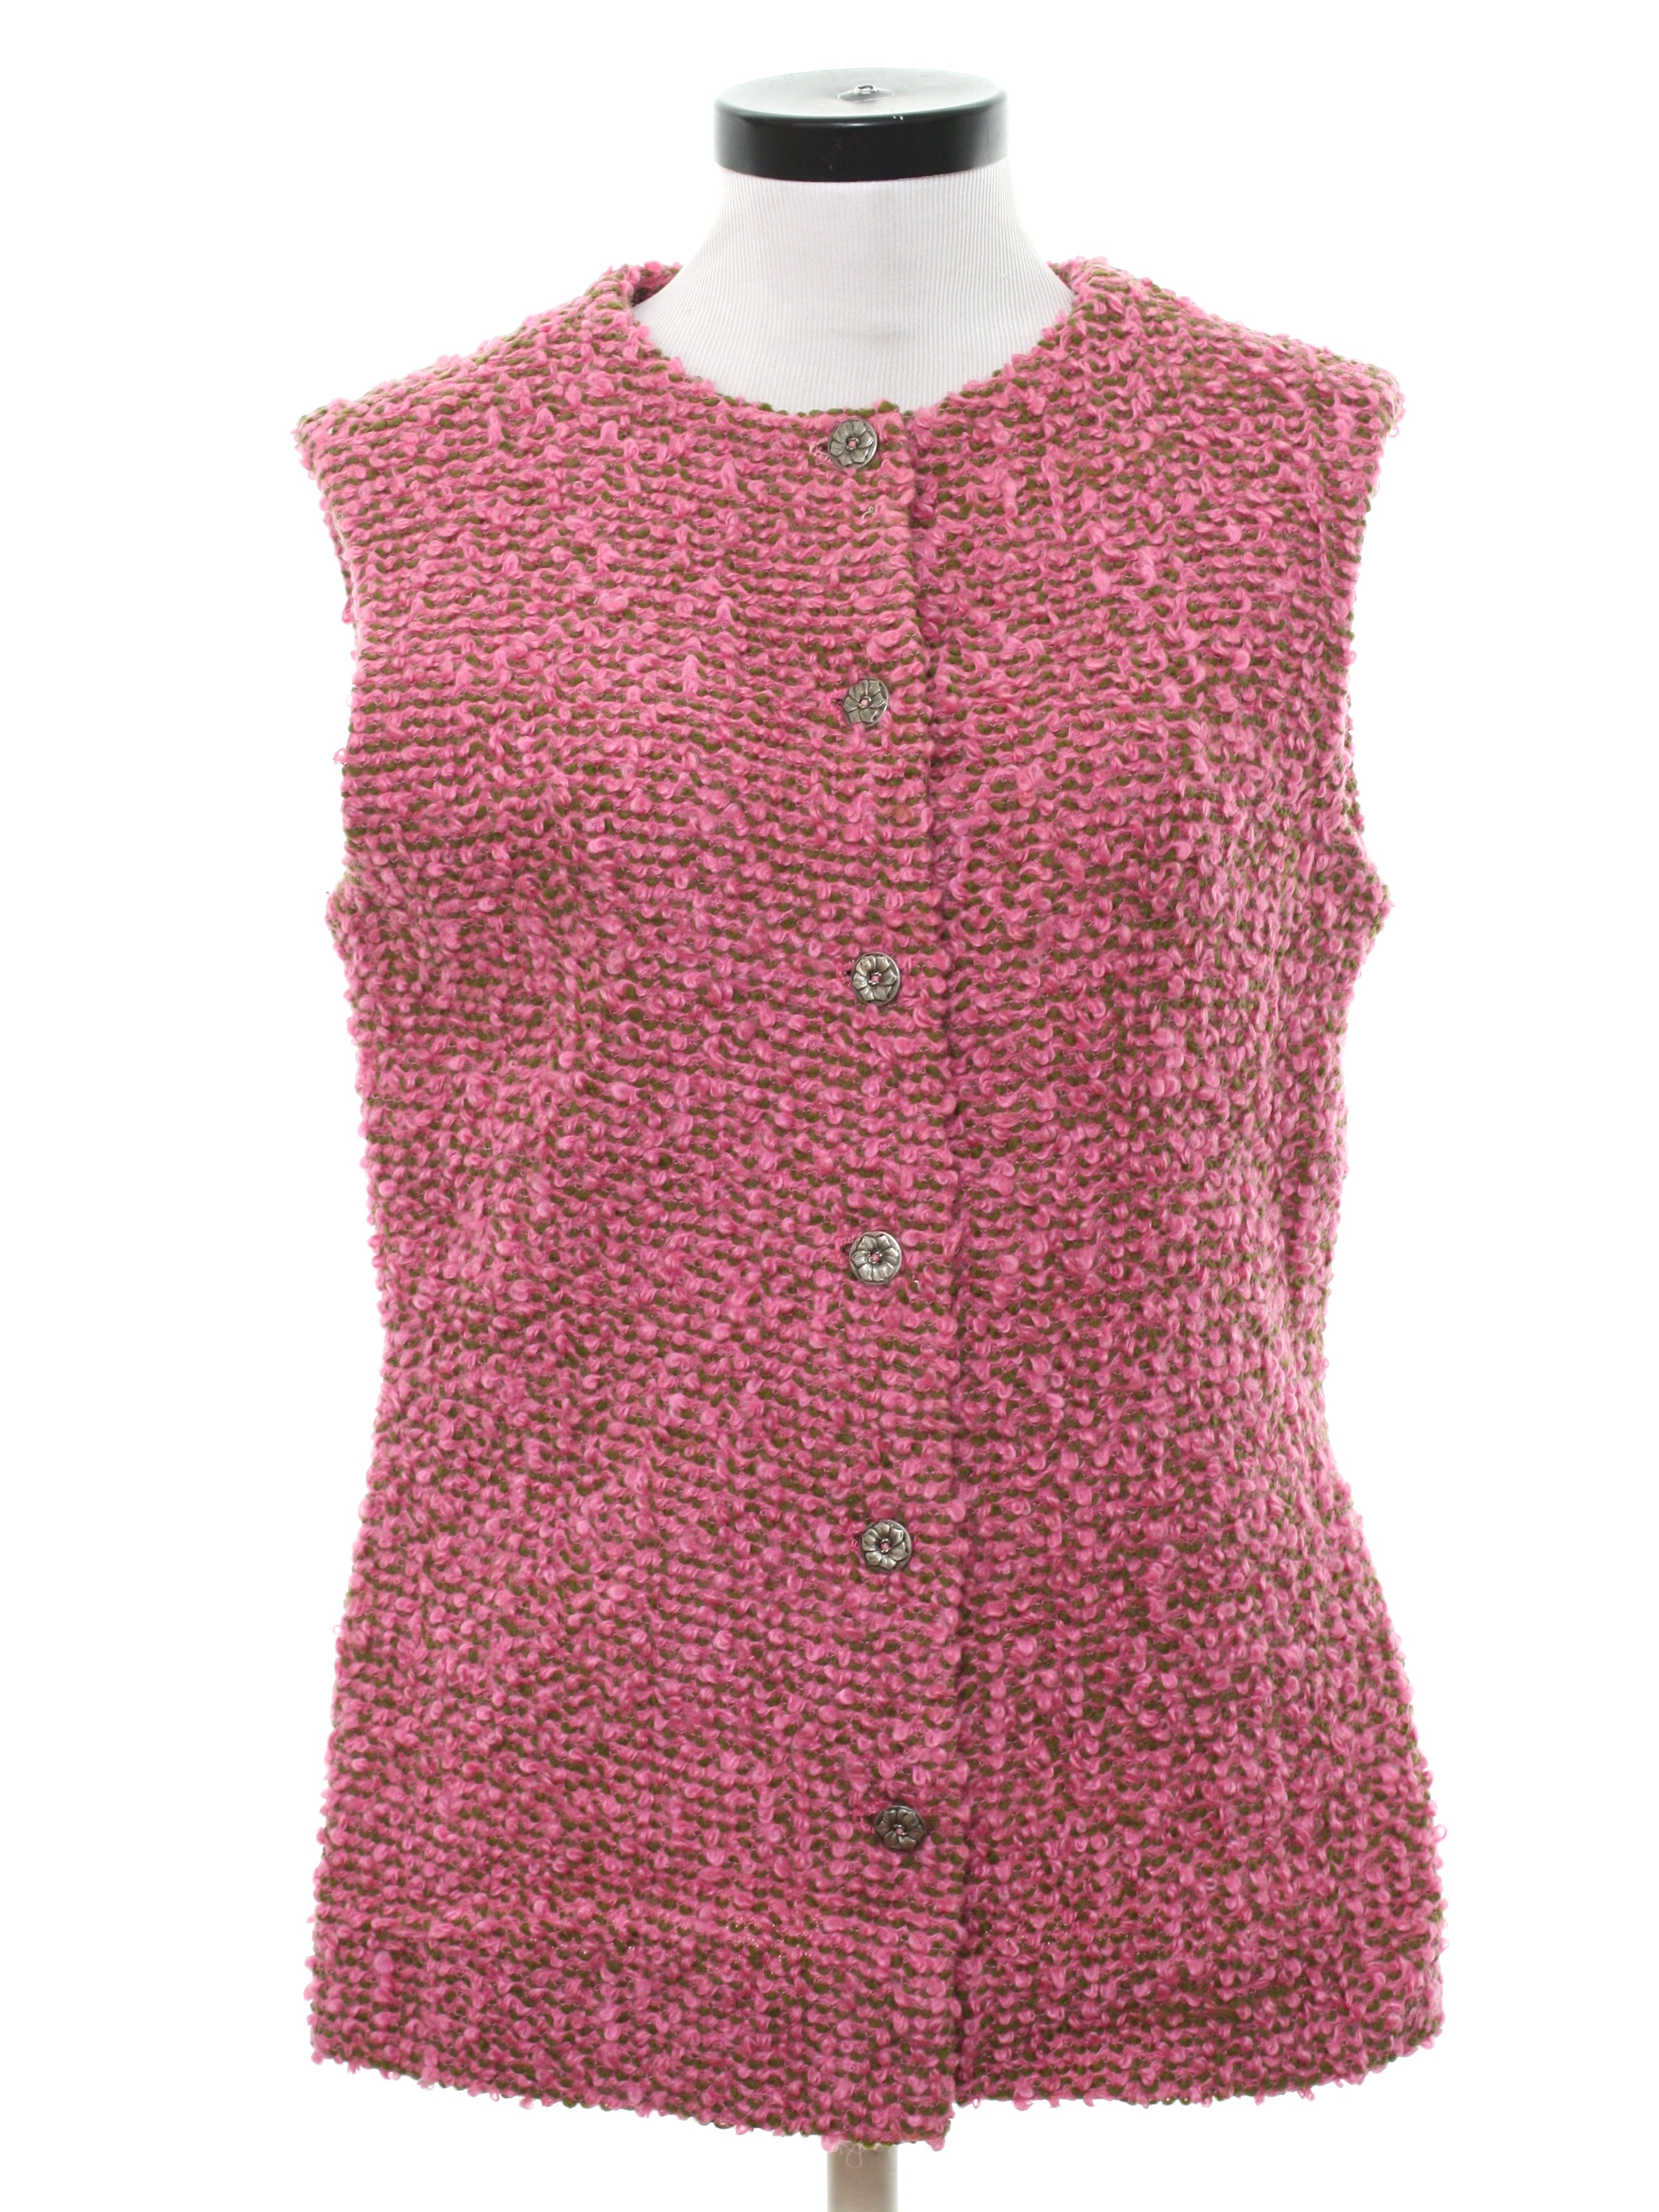 Retro Sixties Vest: 60s -Home Sewn- Womens pink and avocado green ...